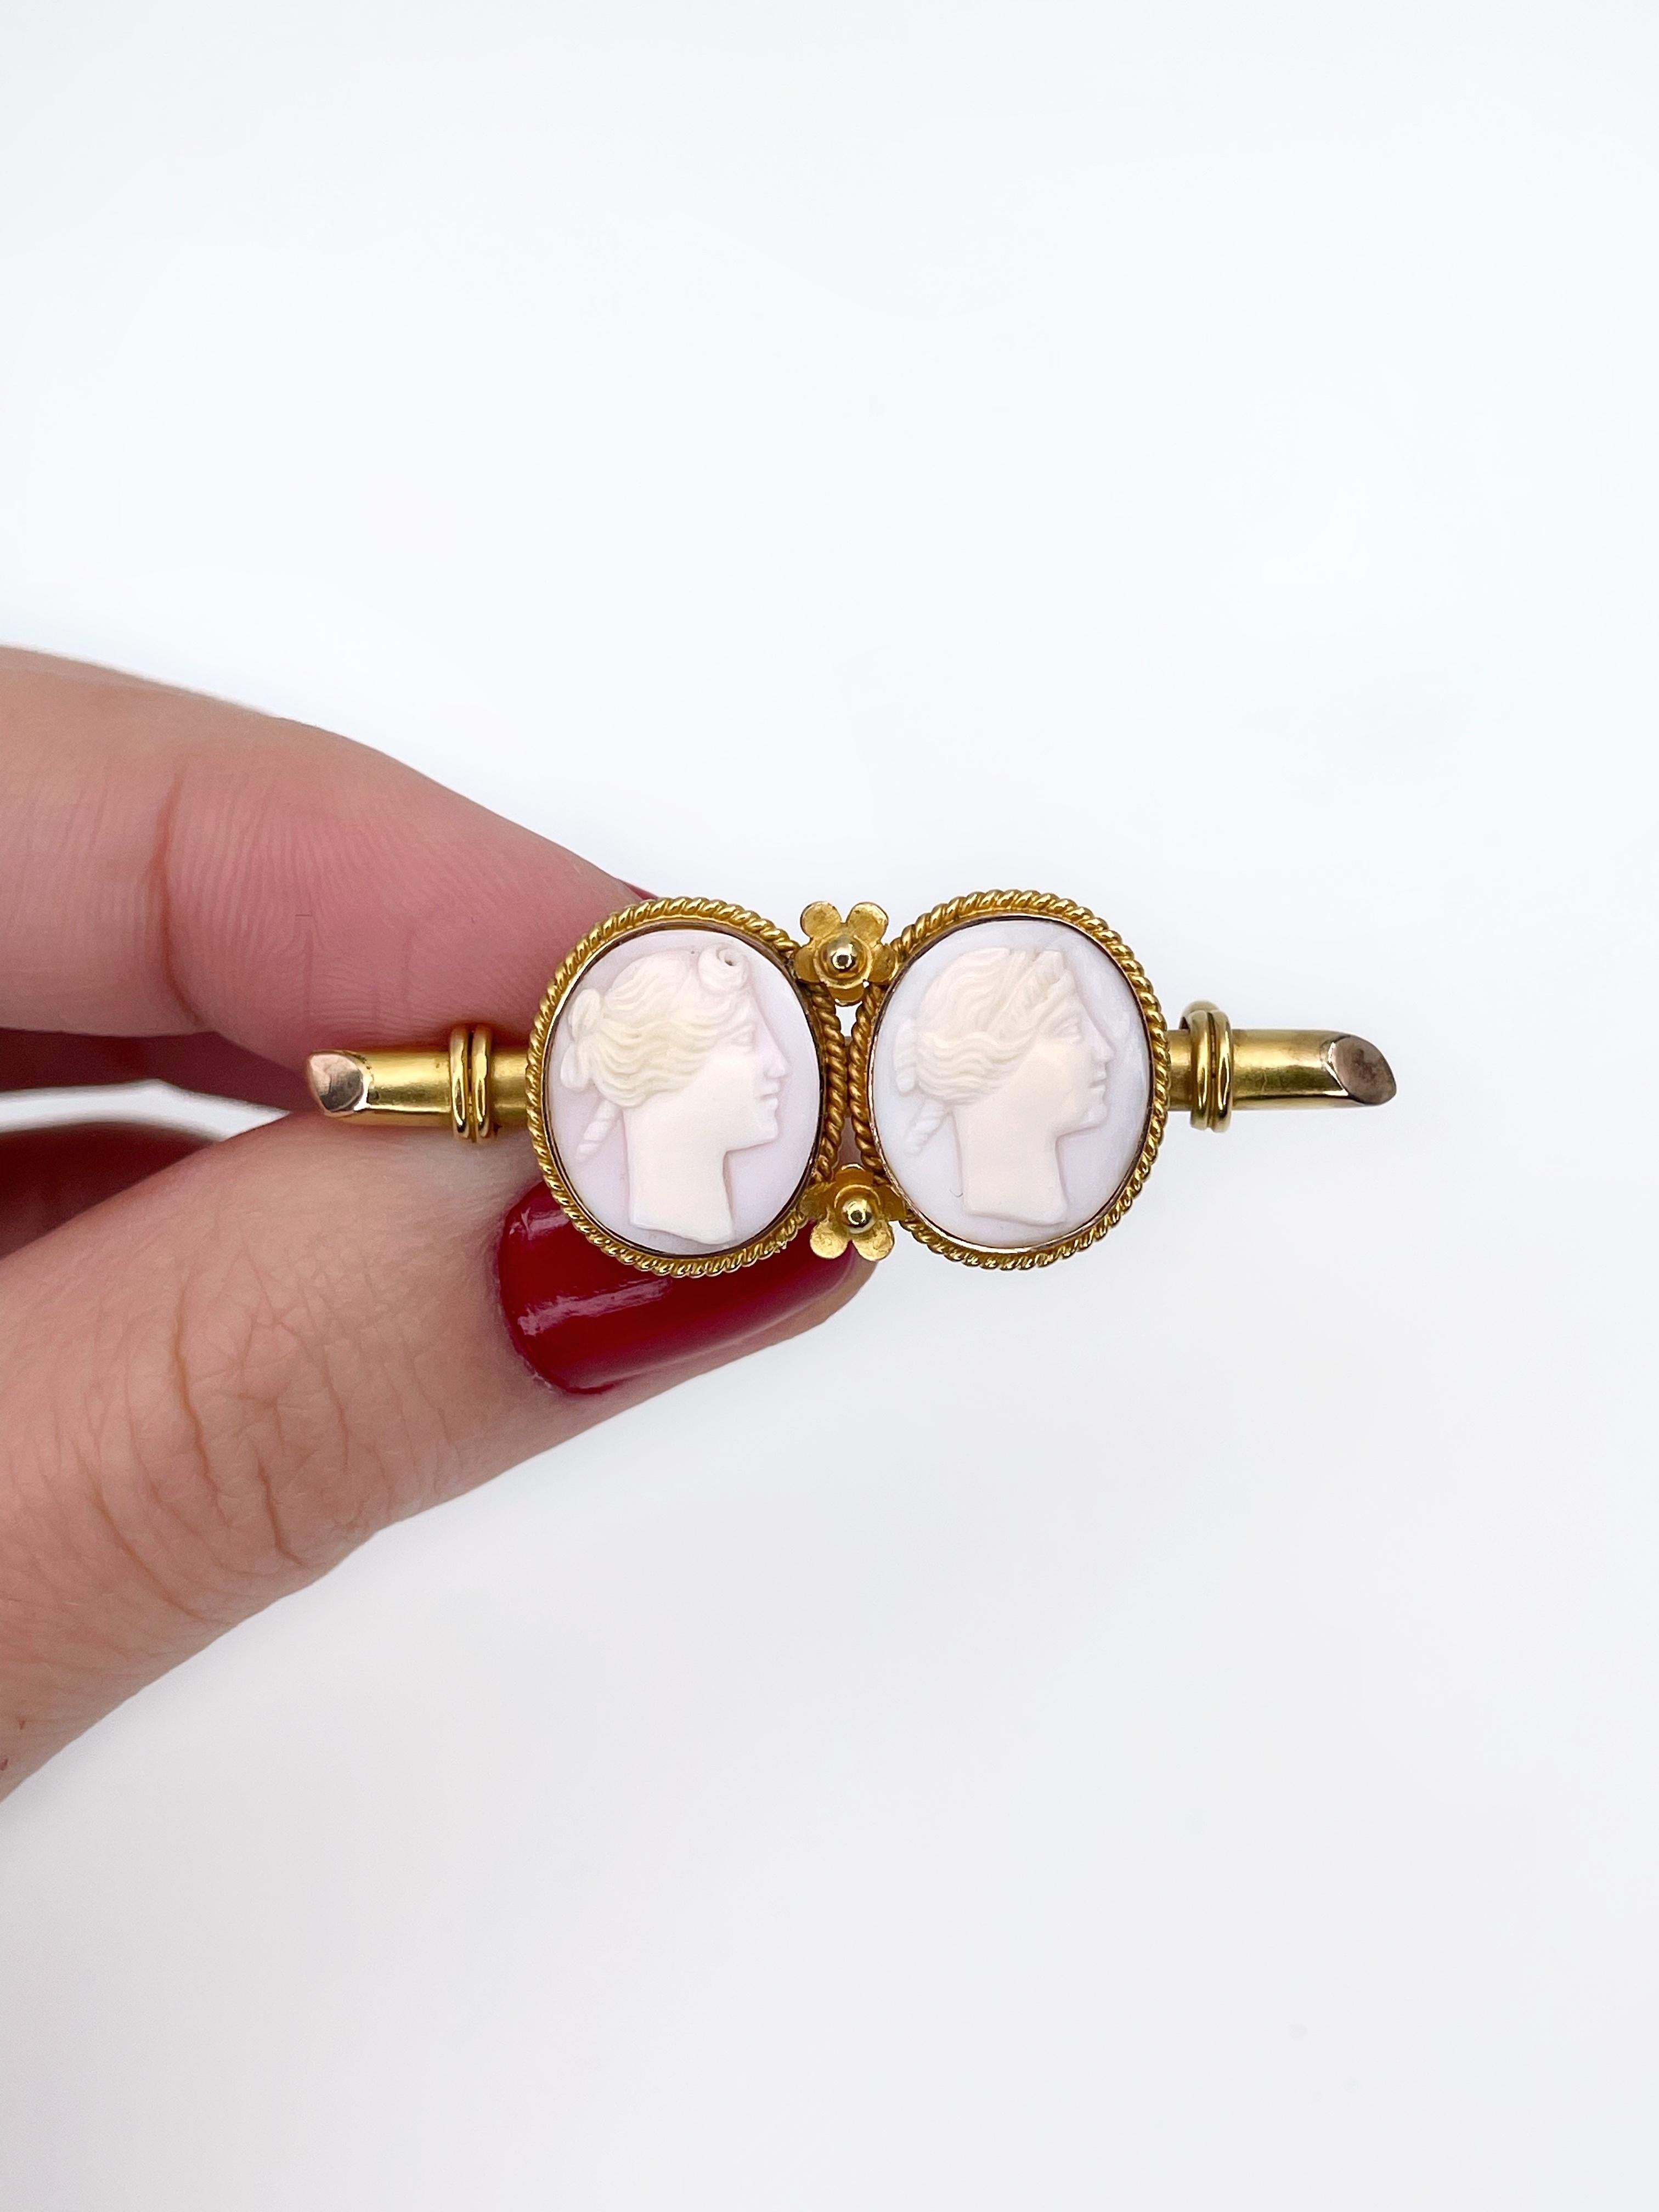 This is an elegant antique brooch crafted in 9K gold. Pin - MET. 

The piece features two cameos depicting right facing persons - possibly man and woman. Cameos are carved from shell. The brooch has floral details.

Length: 4.5cm
Width: 1.6cm
Cameo